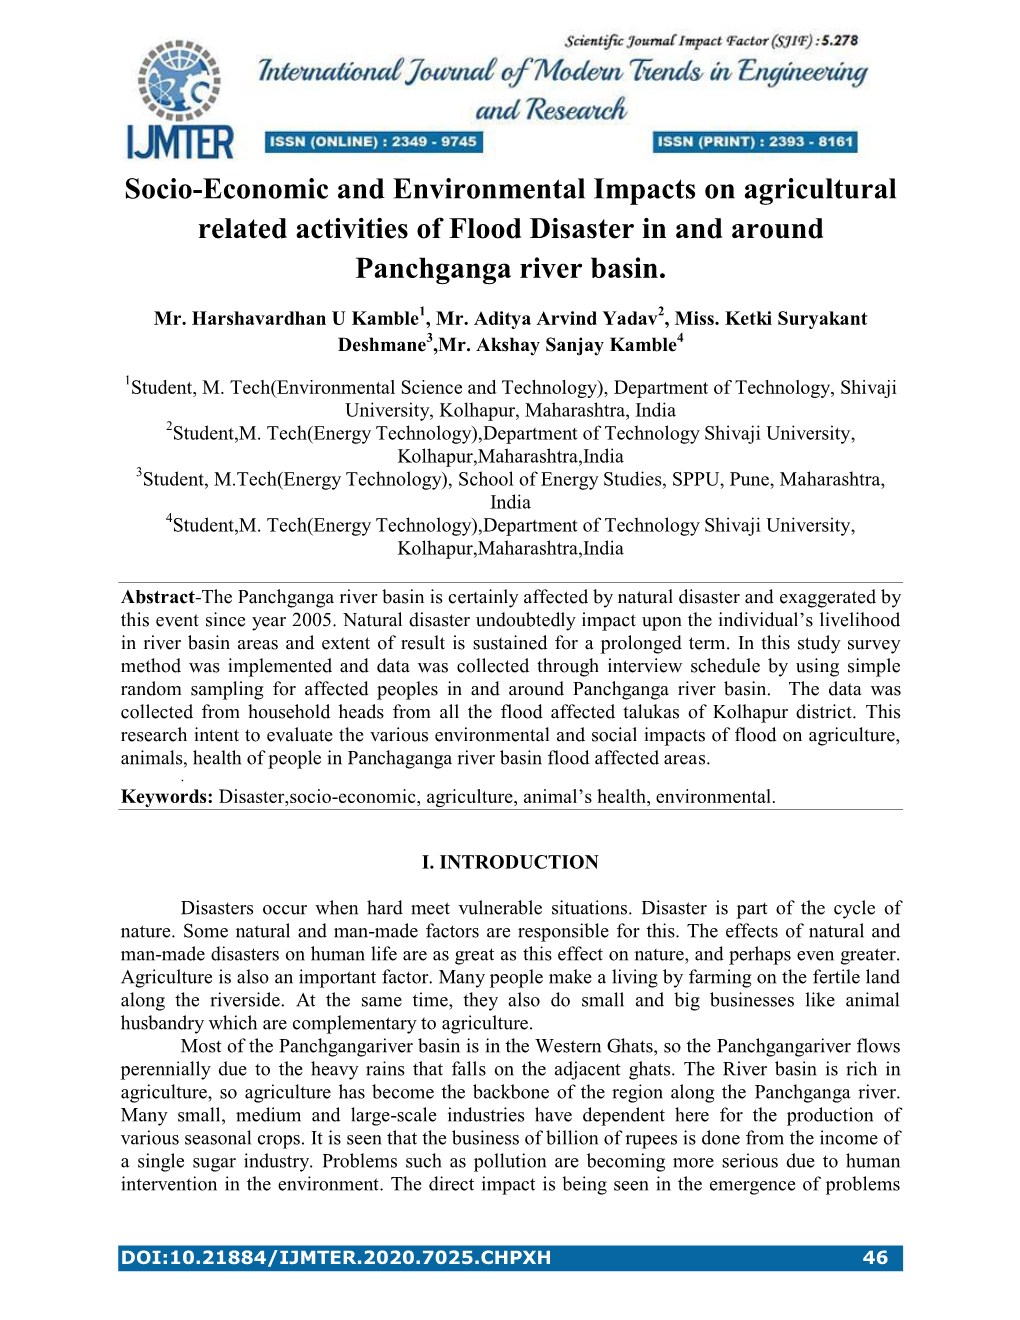 Socio-Economic and Environmental Impacts on Agricultural Related Activities of Flood Disaster in and Around Panchganga River Basin